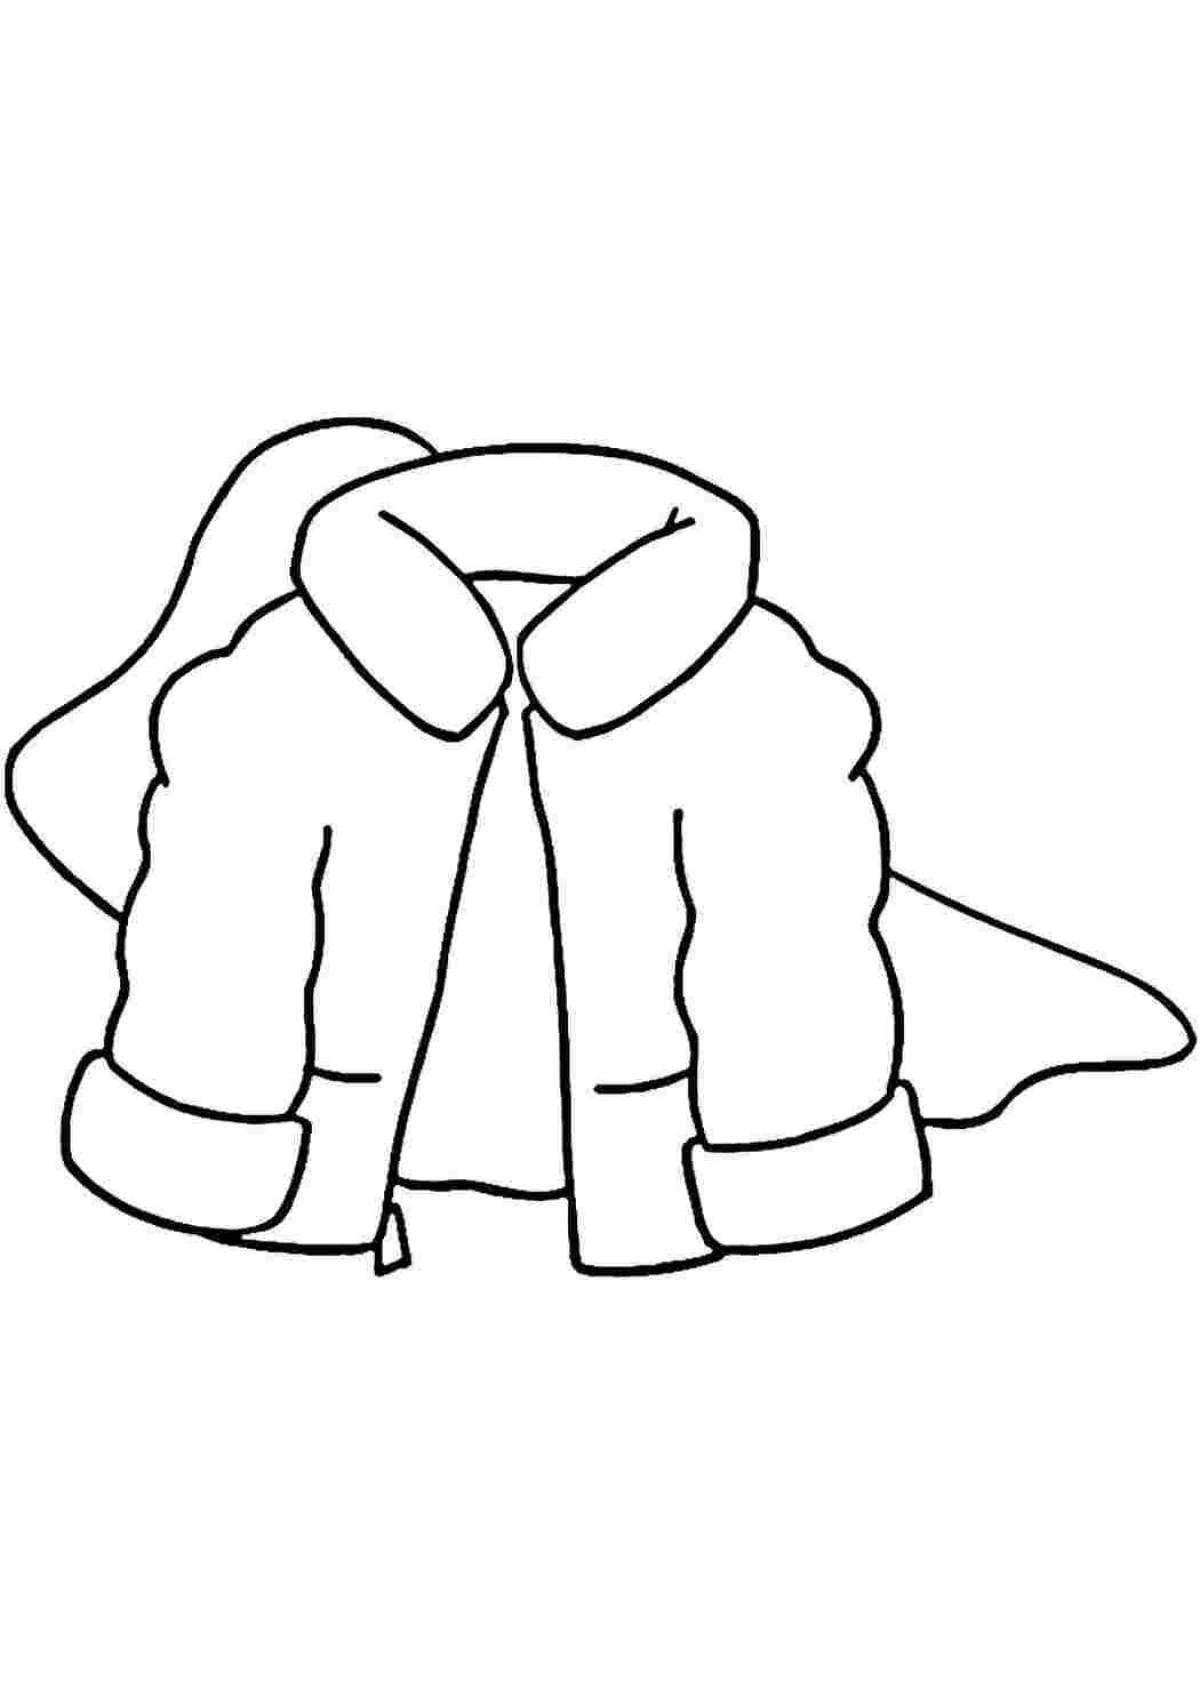 Awesome winter clothes coloring page for 6-7 year olds